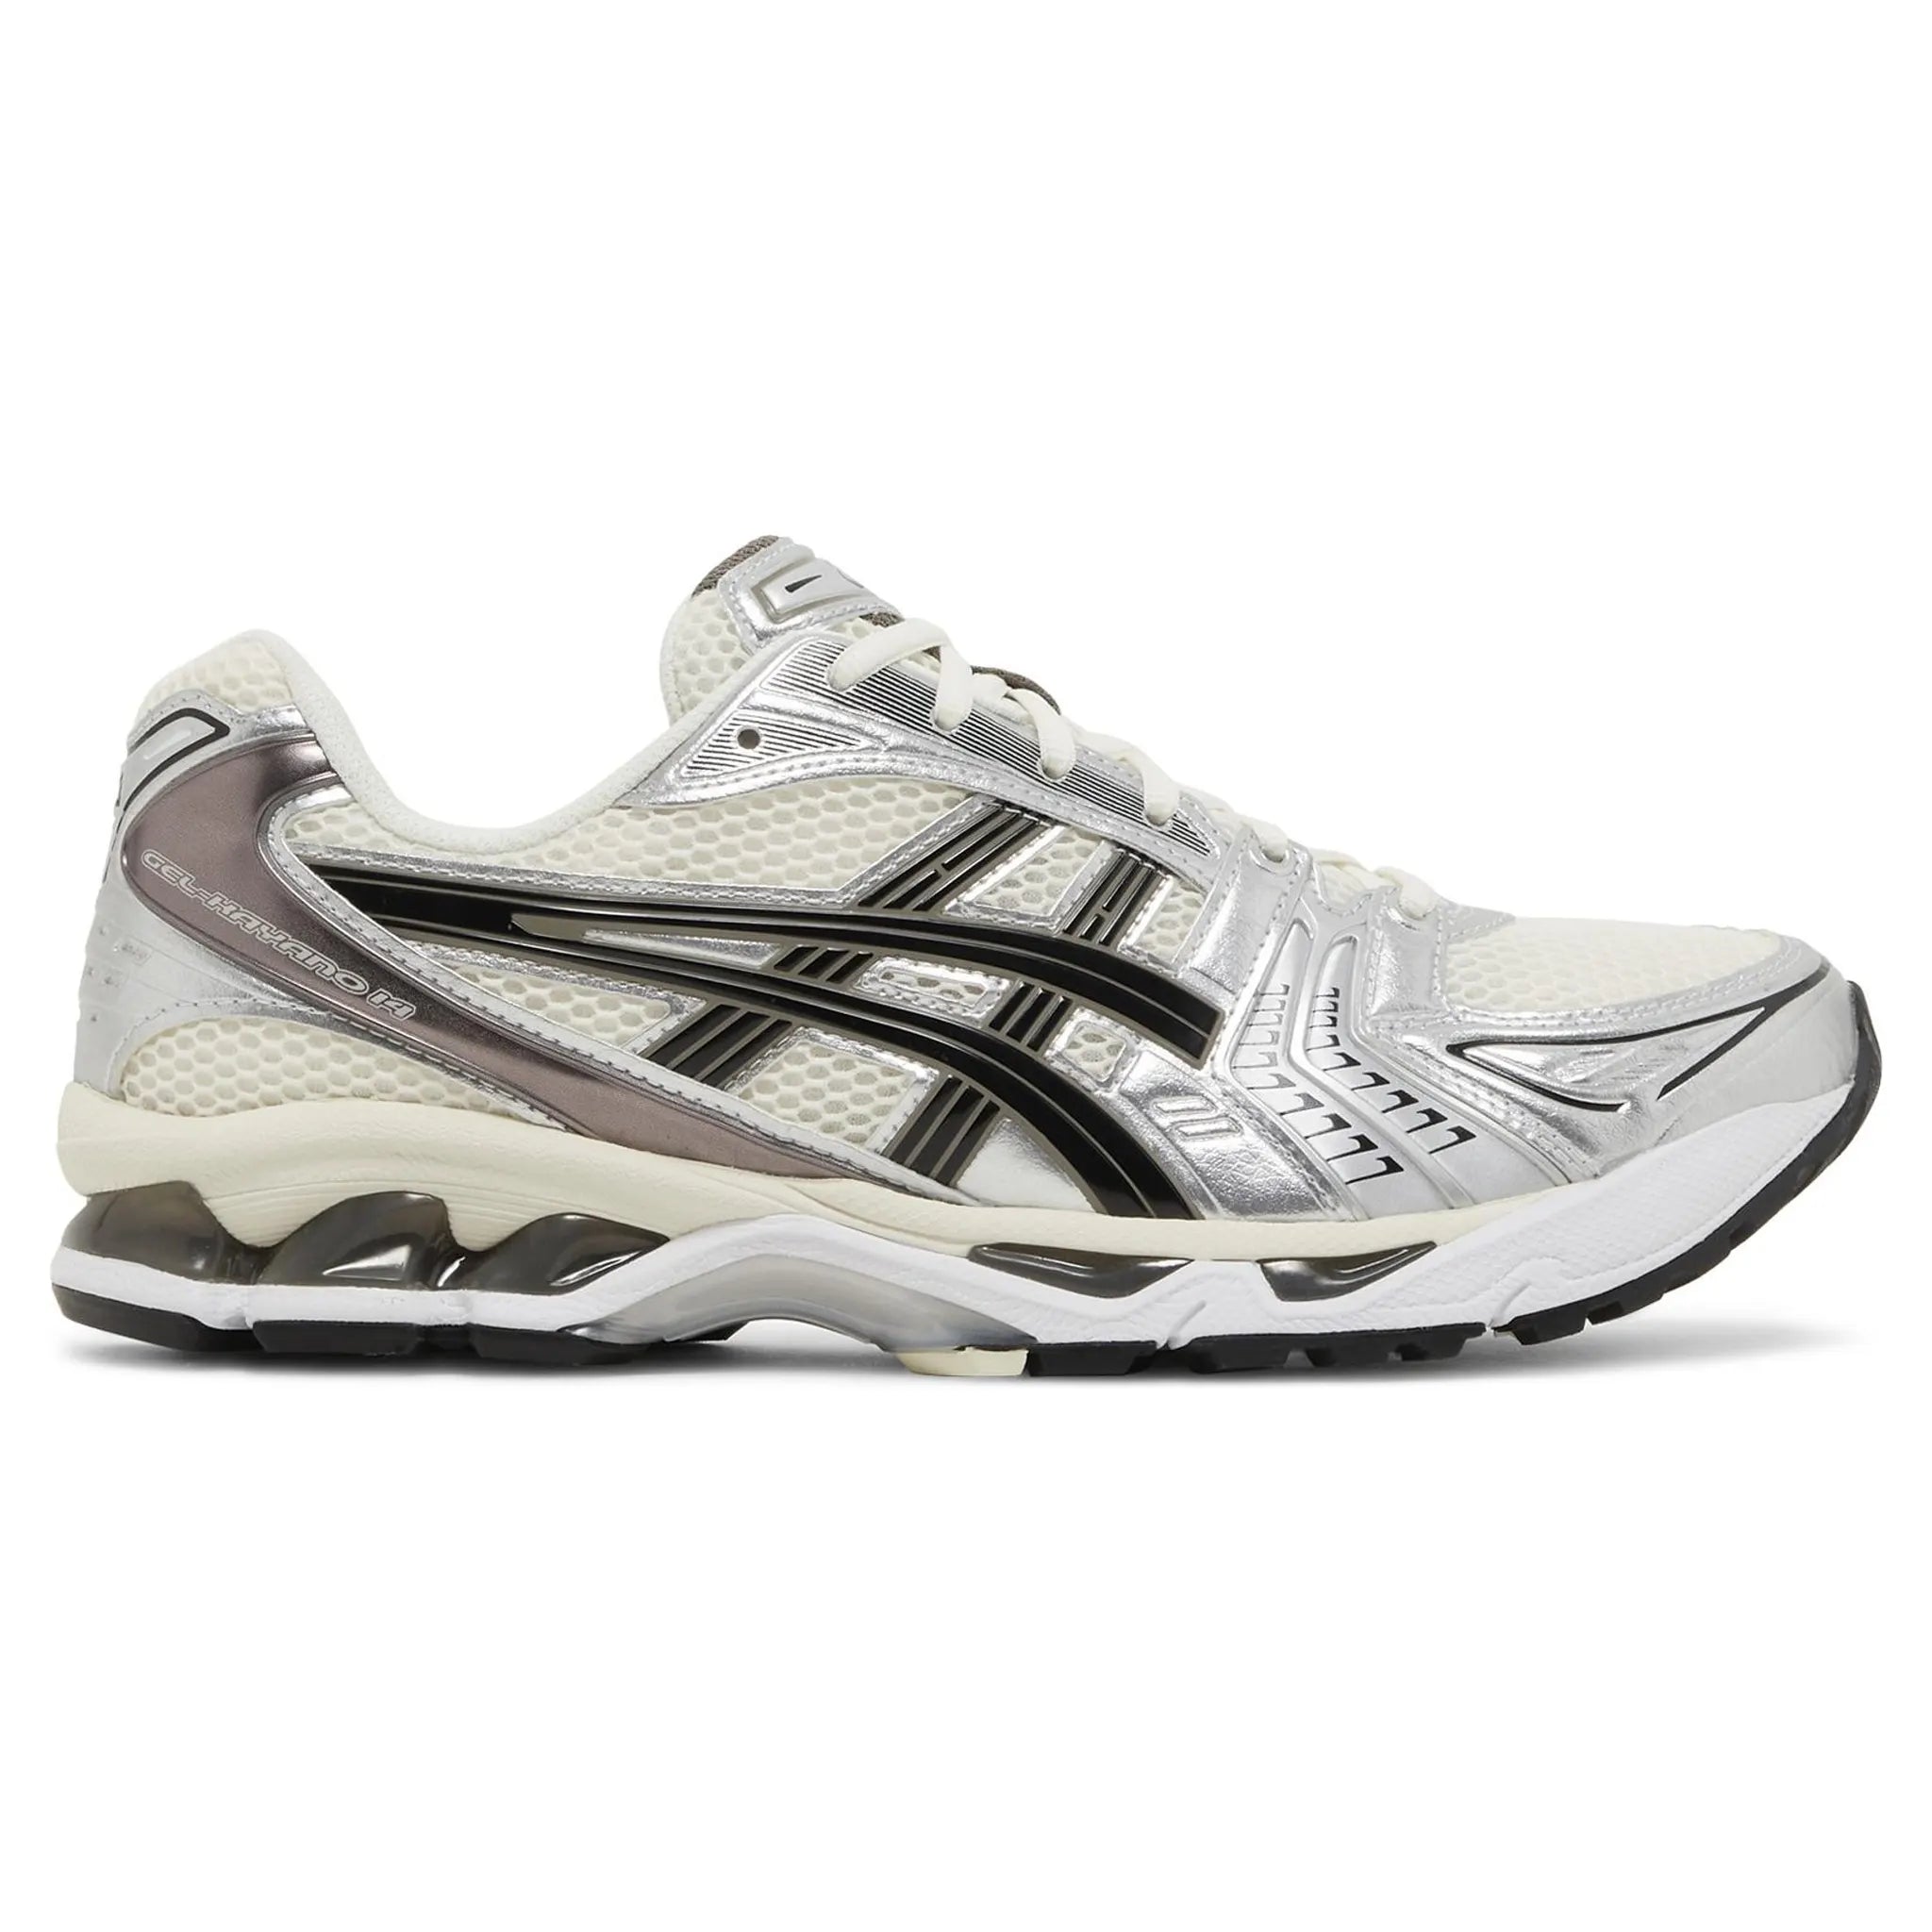 Side view of ASICS Gel-Kayano 14 Silver Cream 1201A019-108